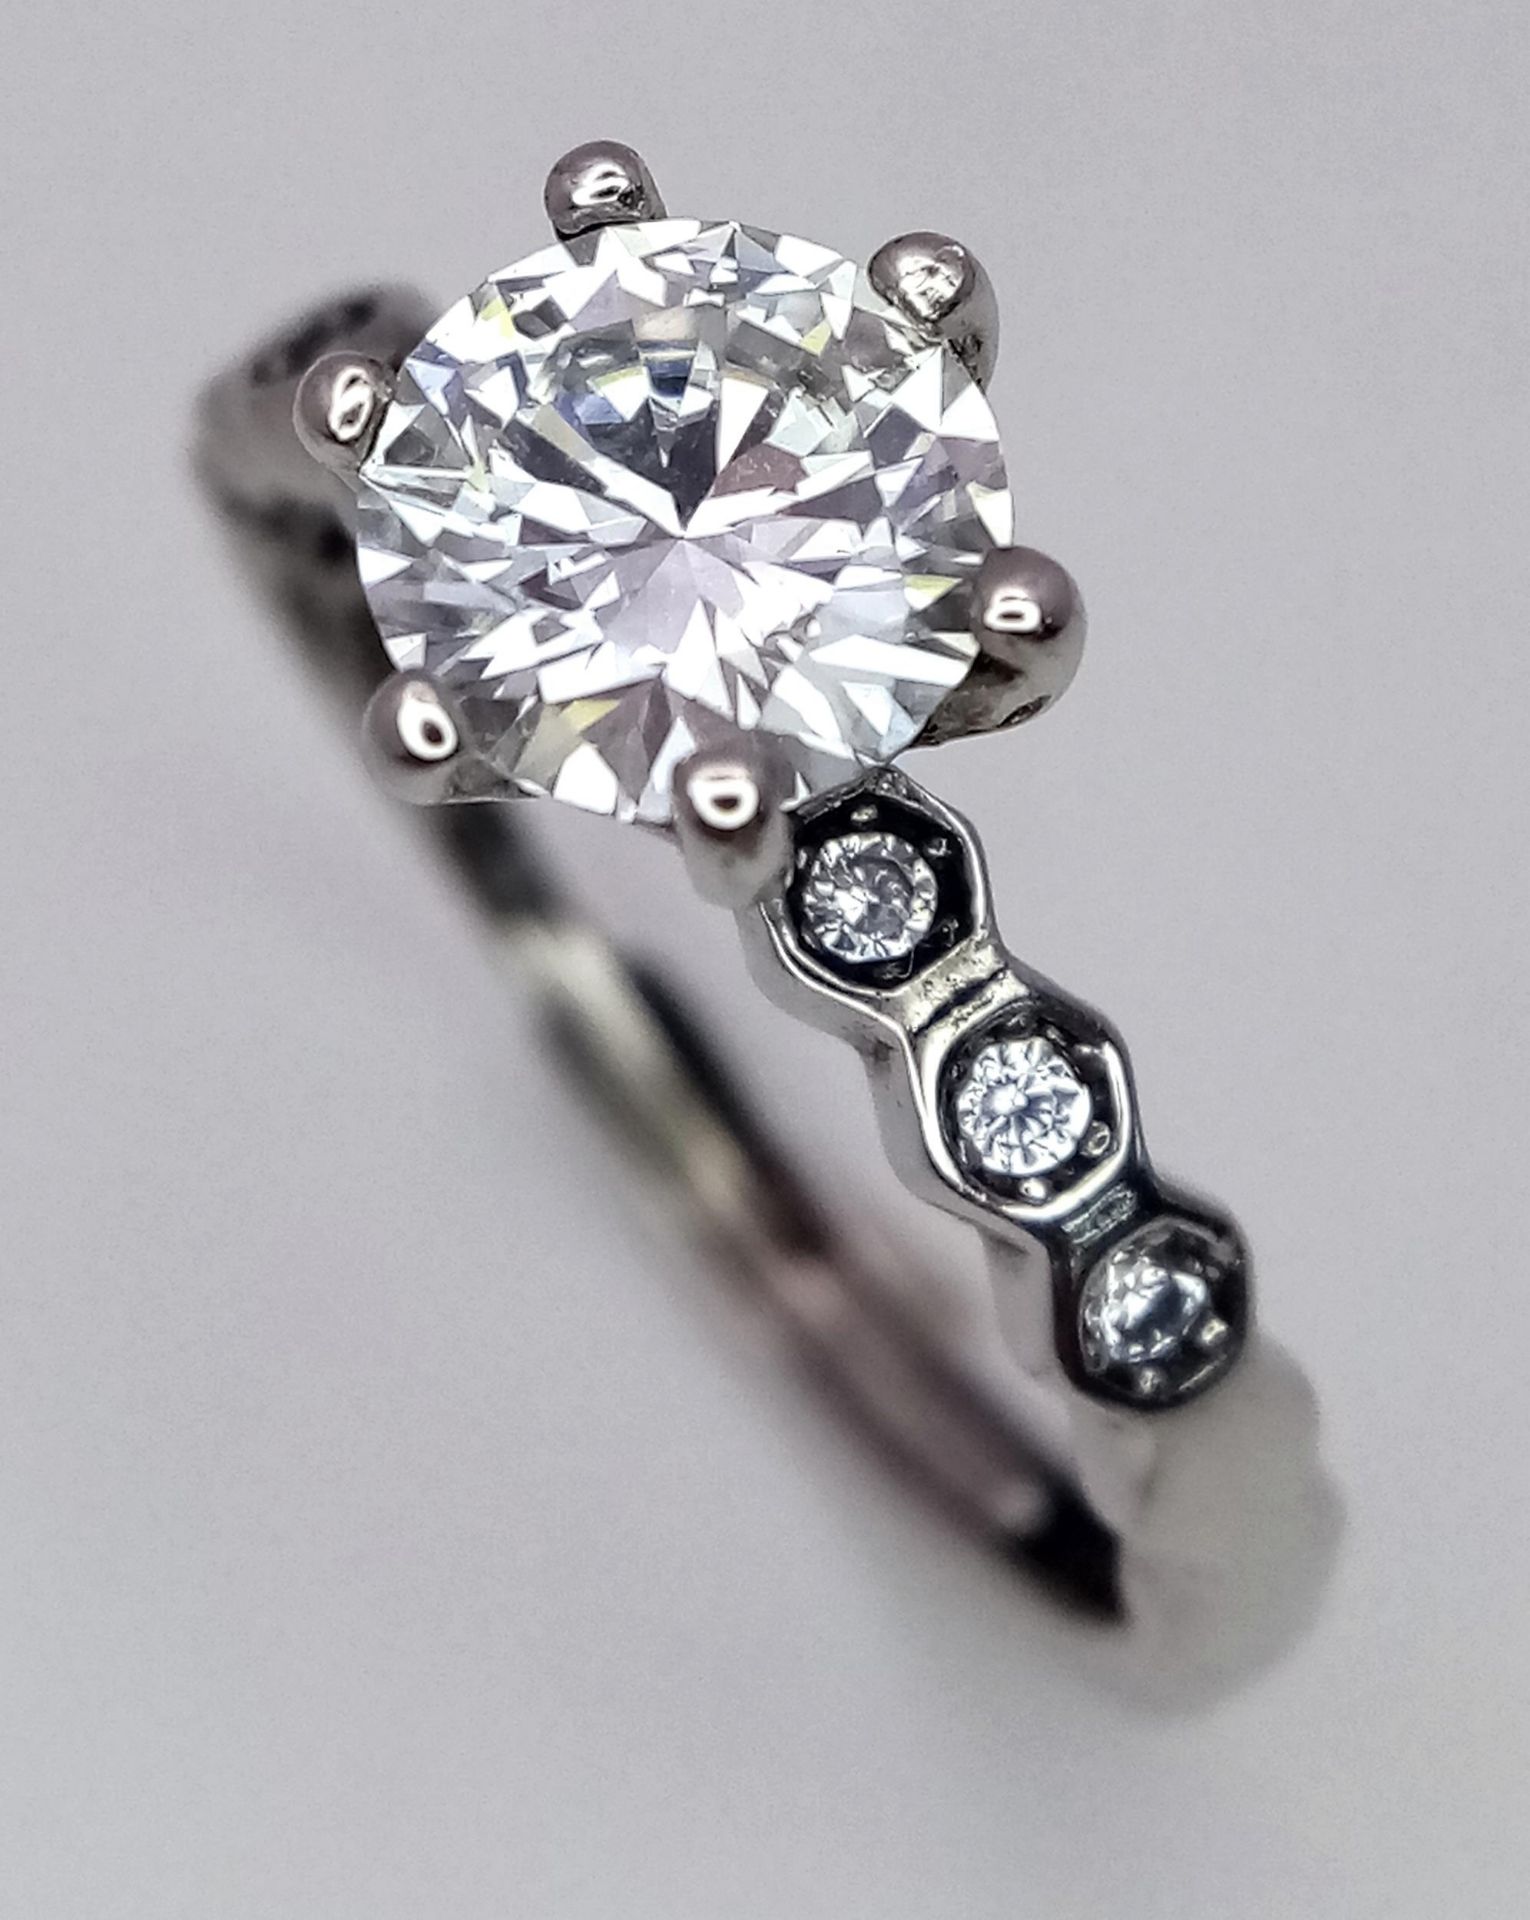 A 1ct Moissanite Ring set in 925 Silver. Comes with a GRA certificate. Size N.